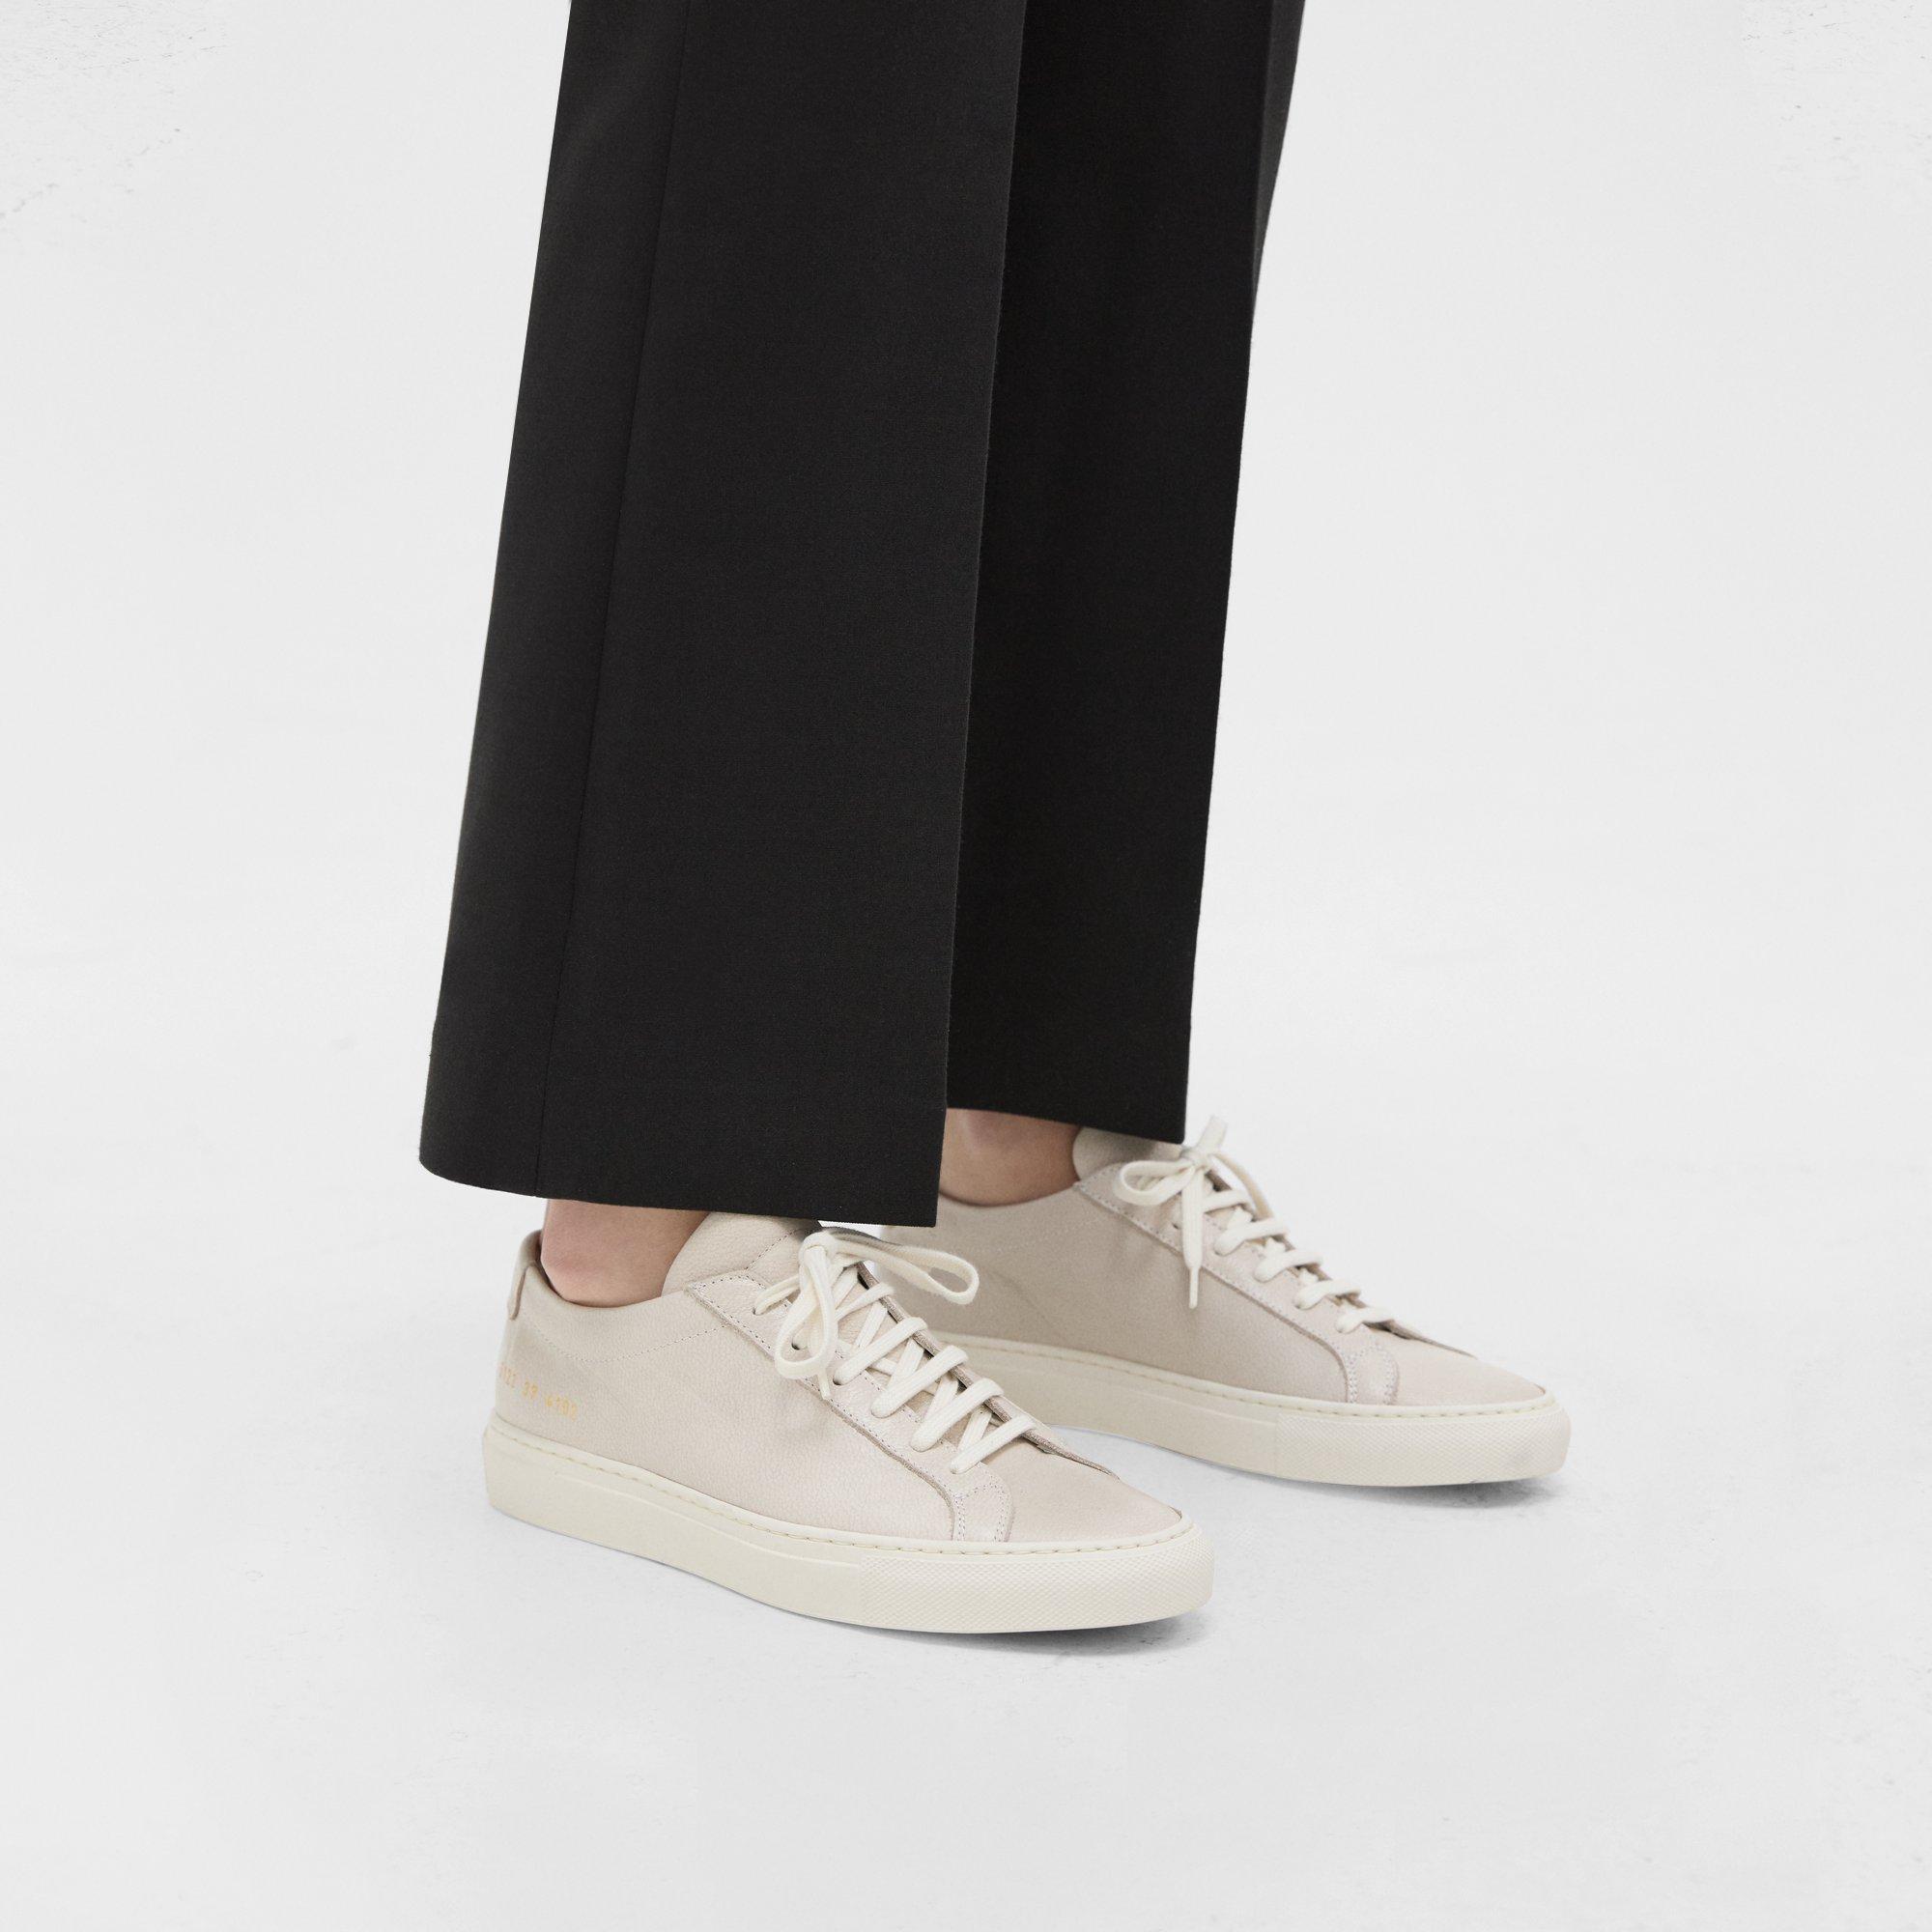 Theory Common Projects Womenâs Original Achilles Sneakers In Off White